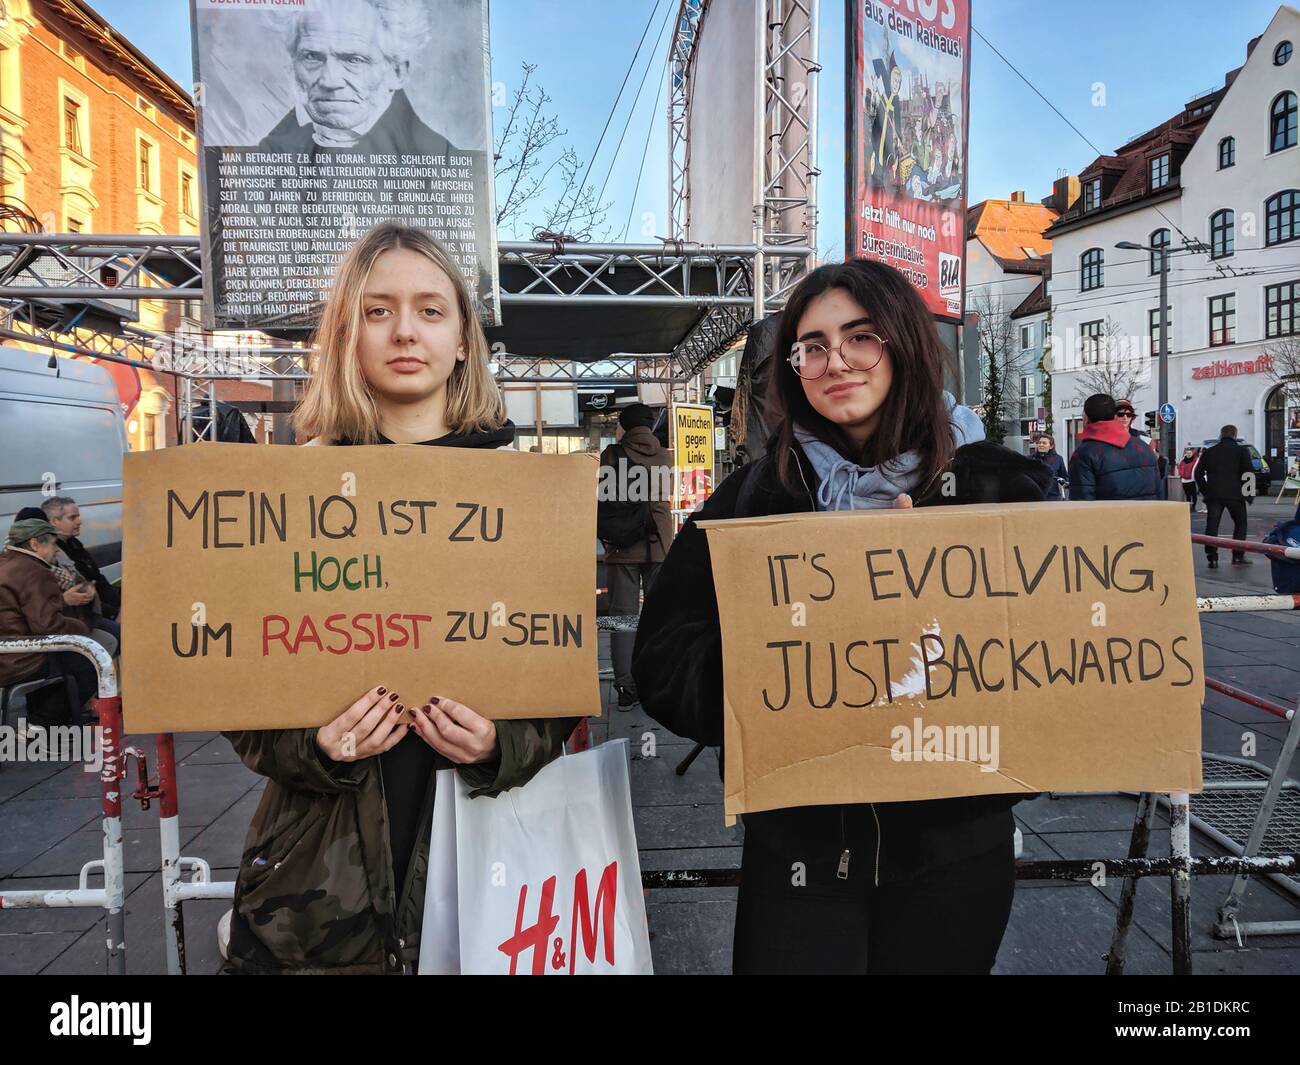 Munich, Germany. 25th Feb, 2020. ''My IQ is too high to be a racist''. Two protesters against hate and neonazis demonstrate against the right extremist Pegida Munich and neonazi BIA groups innthe Pasing district. As the group hides their extremist backgrounds, protestors inform passersby of the reality. As hate and racism escalate in Germany people are demanding an end to the permissiveness and passiveness they believe is leading to radicalization and murders. Credit: ZUMA Press, Inc./Alamy Live News Stock Photo